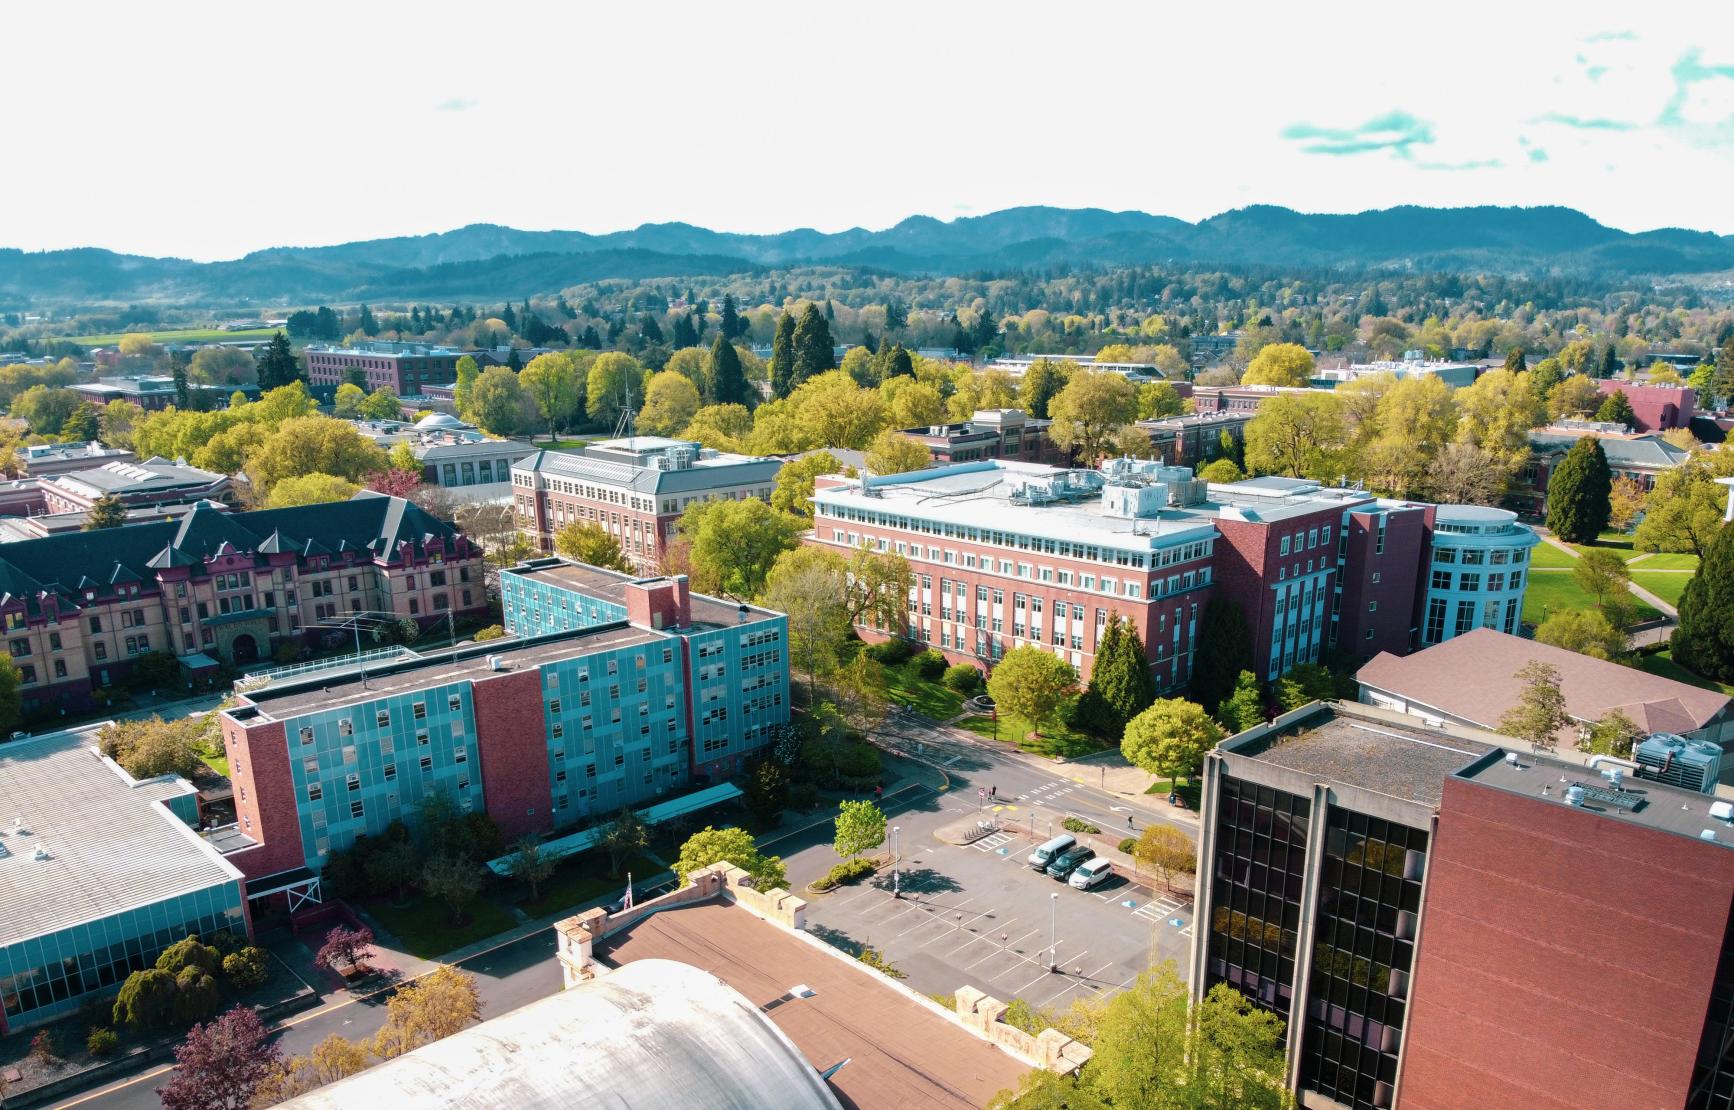 View of the Corvallis campus from the sky.